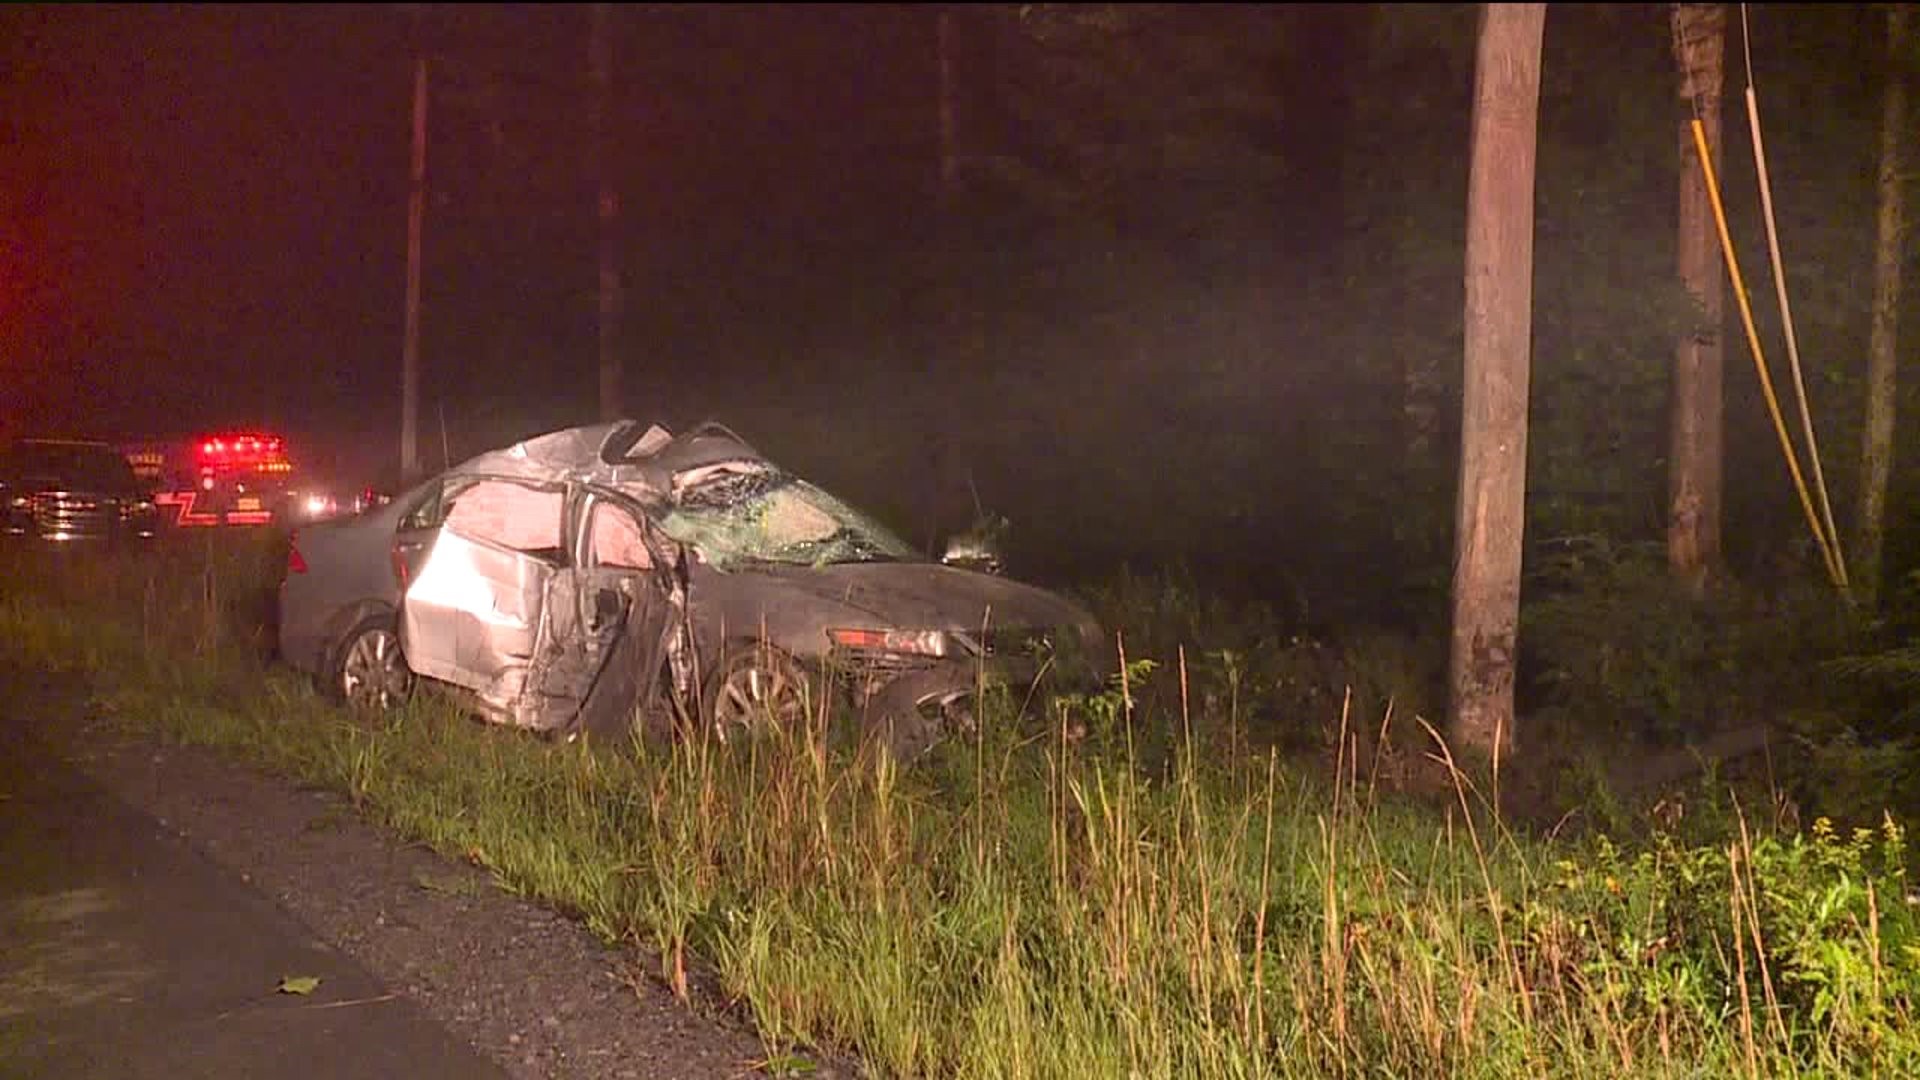 Driver Rushed to Hospital After Rollover Crash in Luzerne County